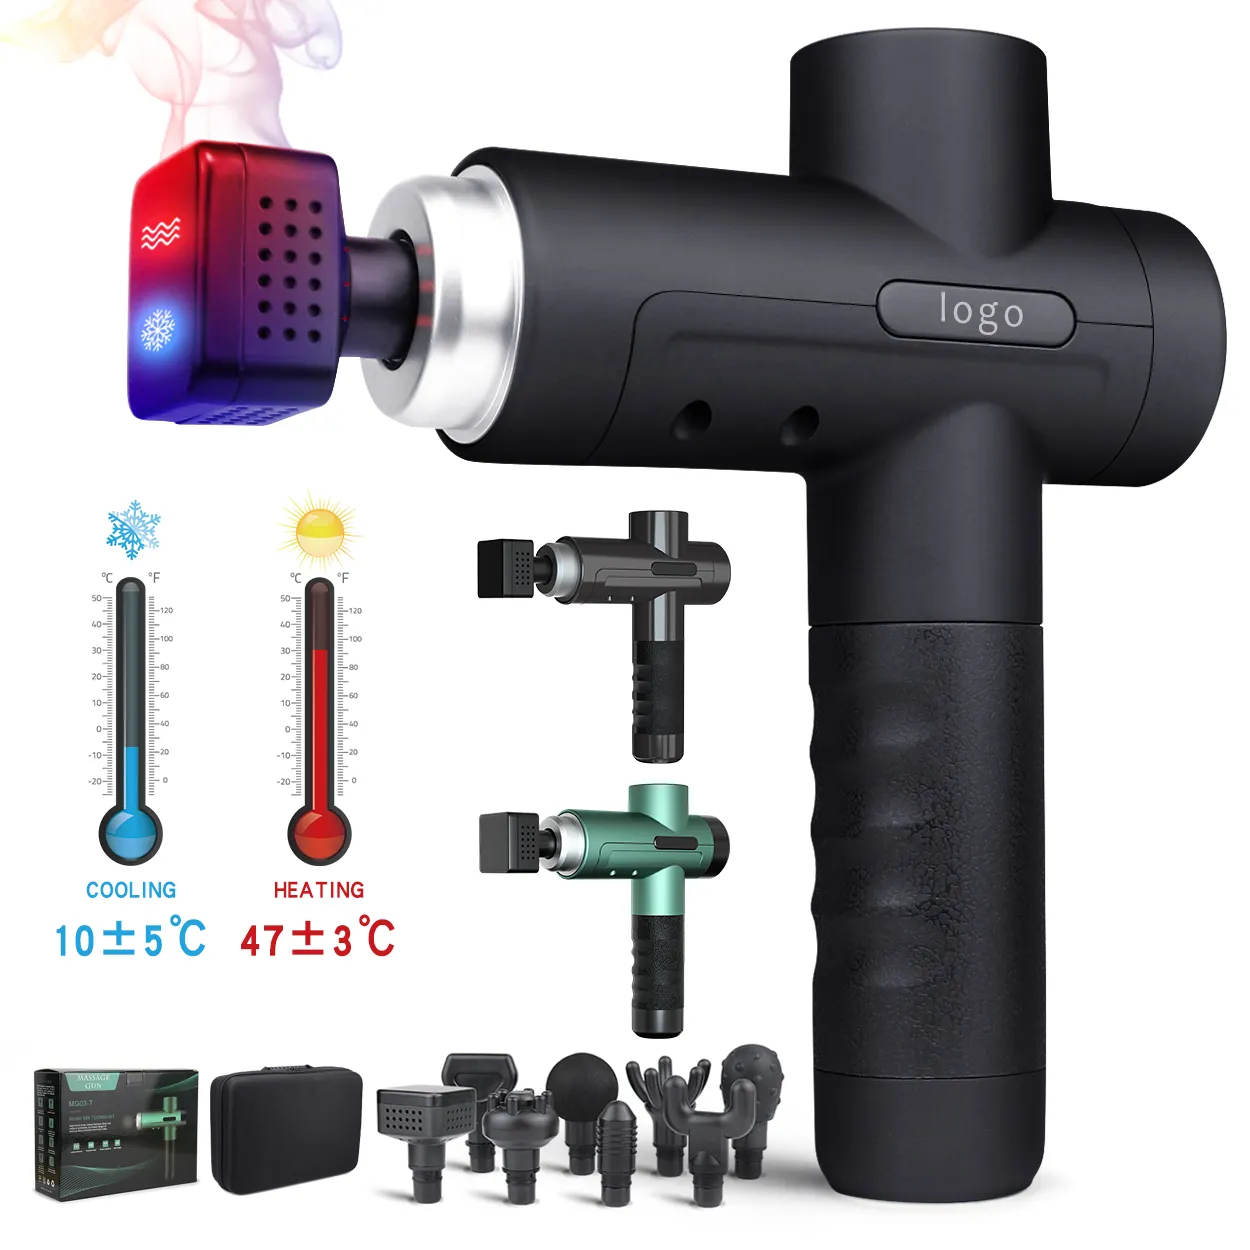 2021 The Massage Tool That Will Make Recovery Easier Muscle Handheld Heating Gun Massager Heated And Cold Massage Gun